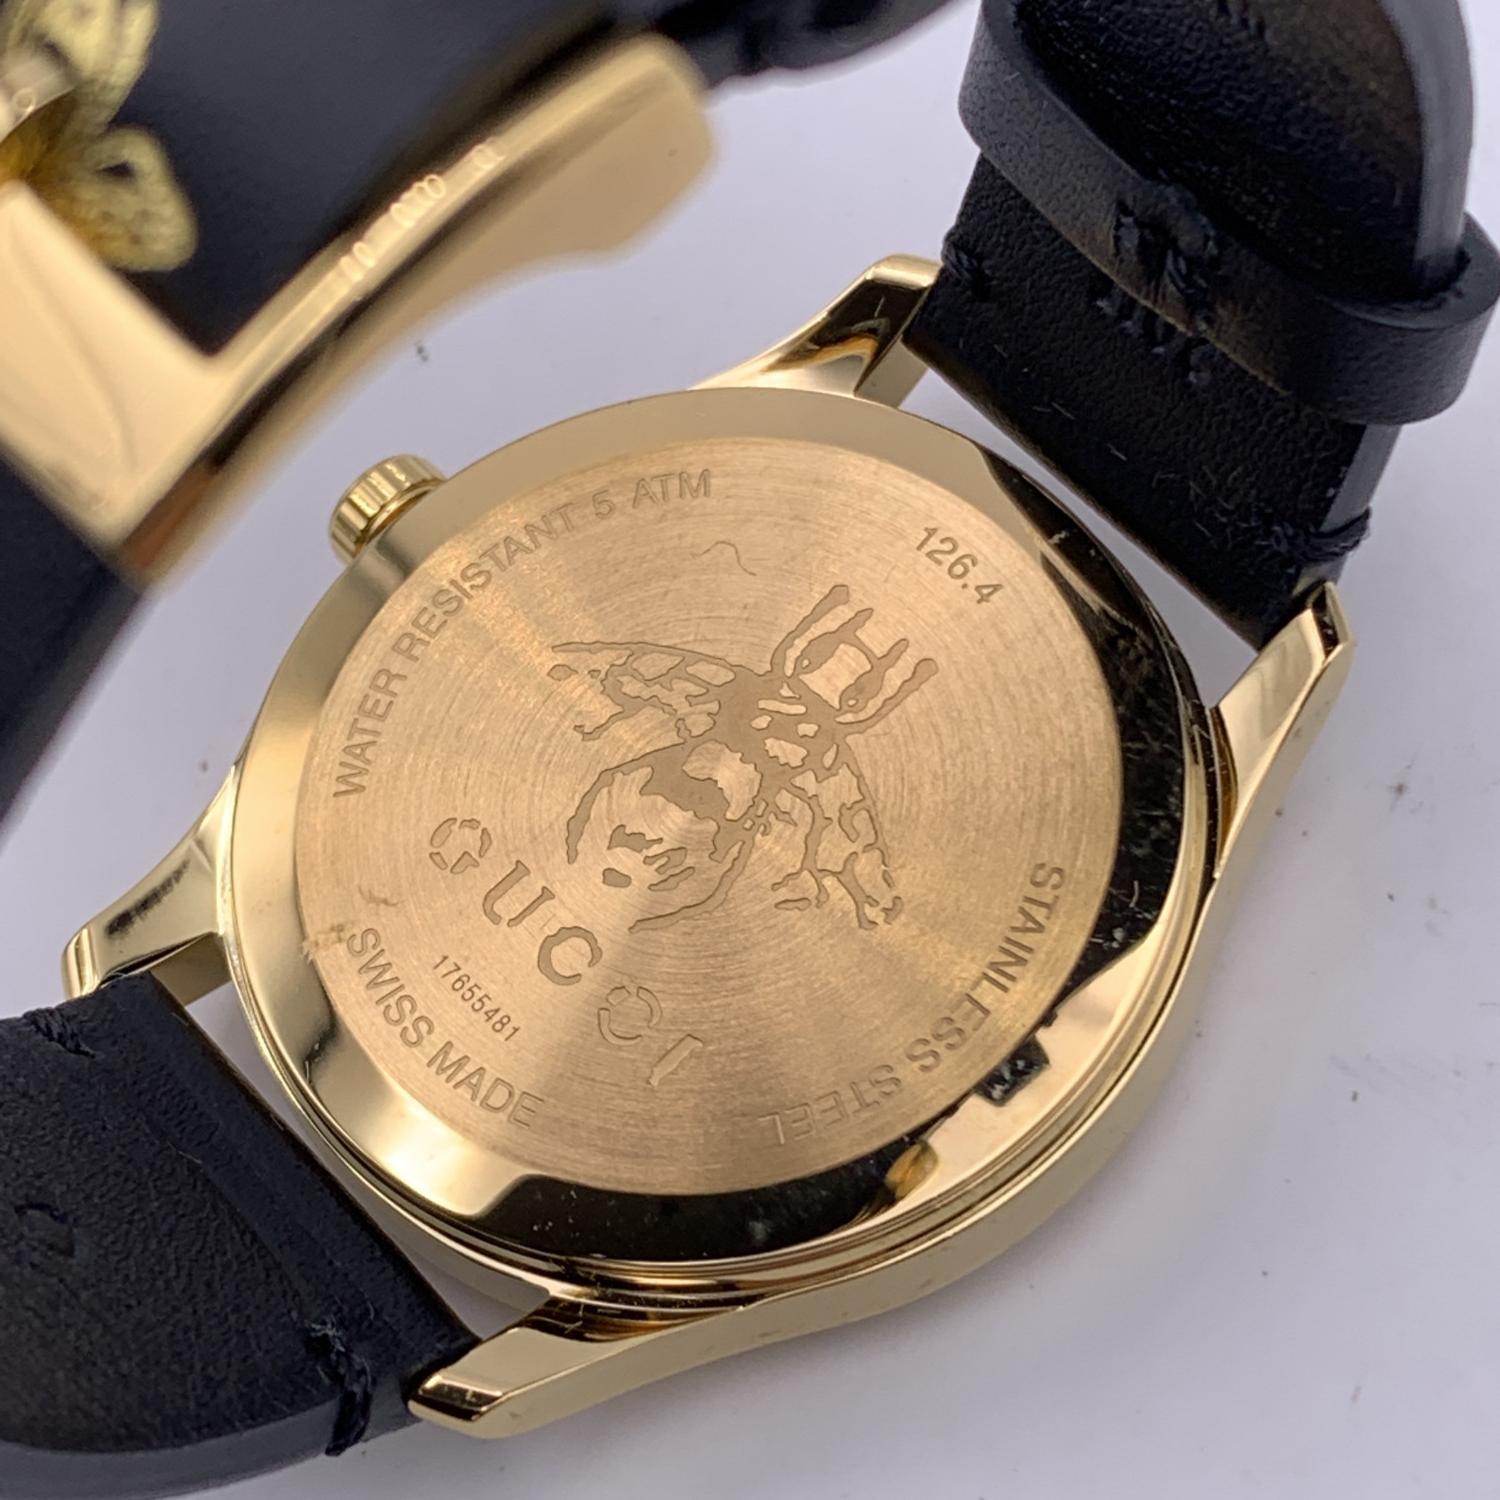 Gucci Gold Black Leather G-Timeless 126.4 Wrist Watch Bee and Stars In New Condition In Rome, Rome